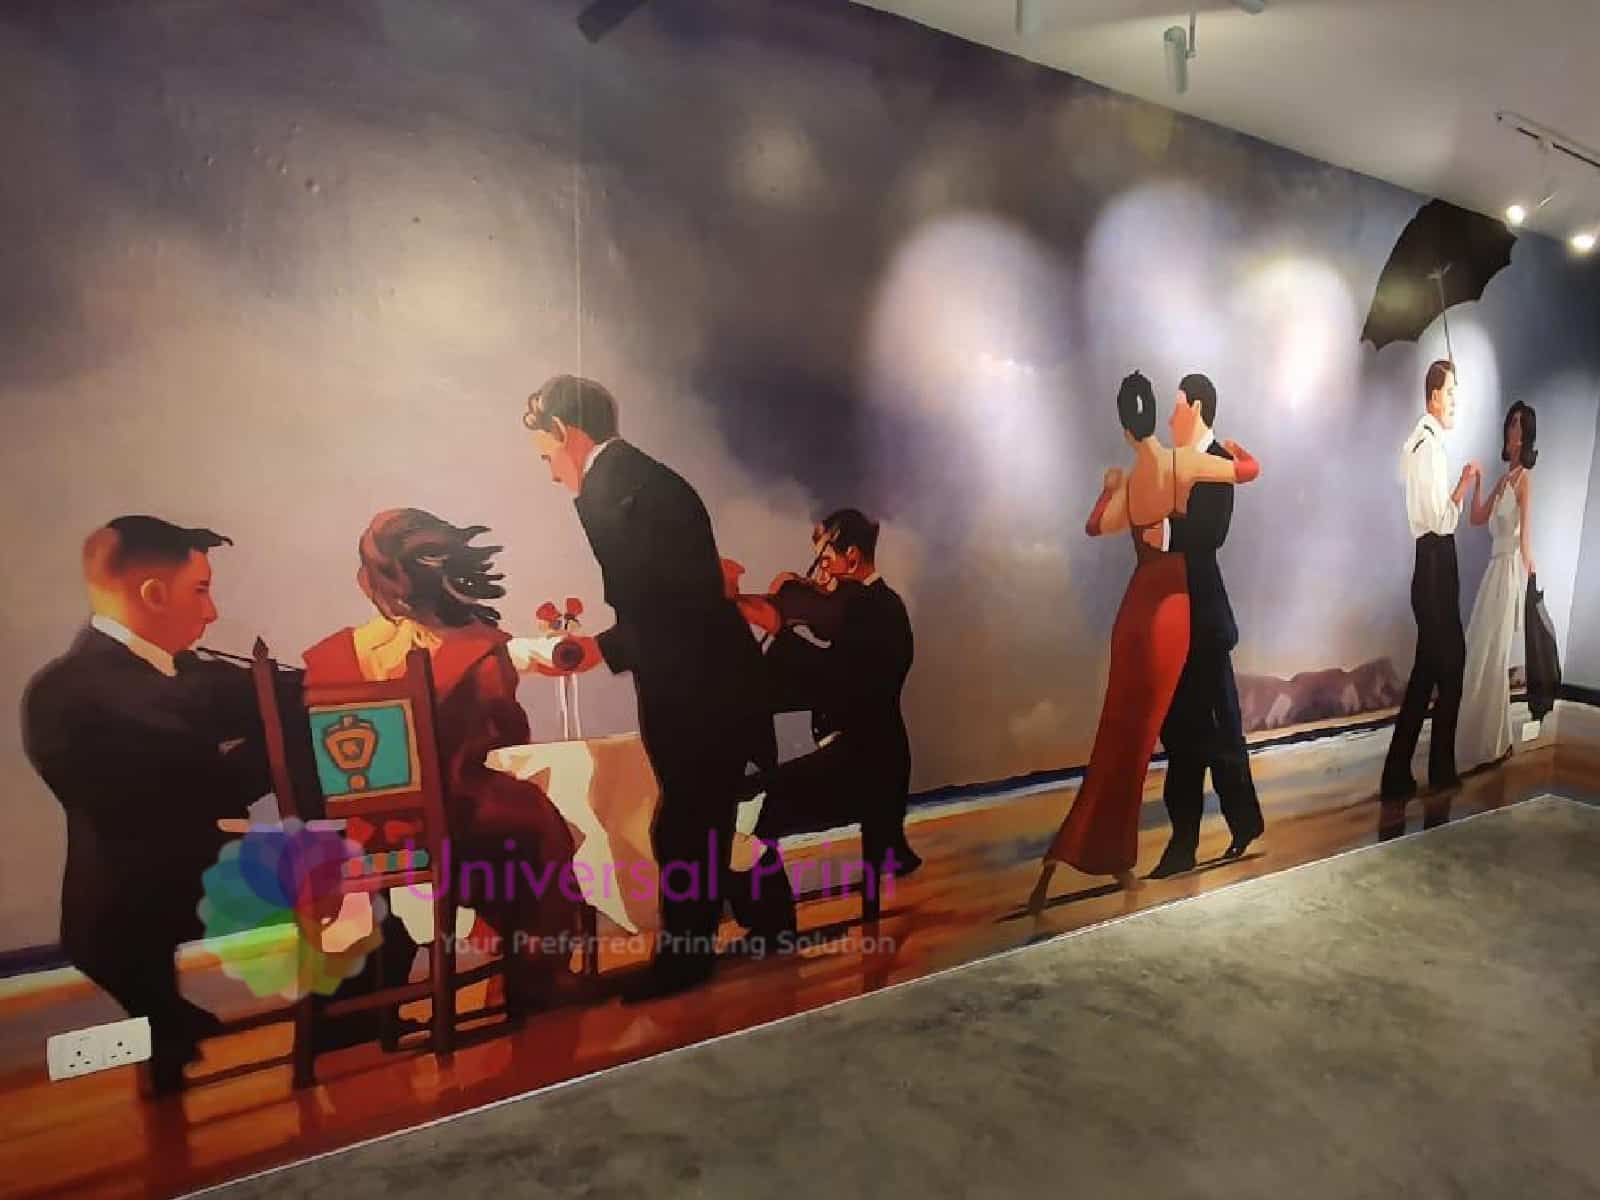 Backdrop Printing Services in Singapore | Universal Print